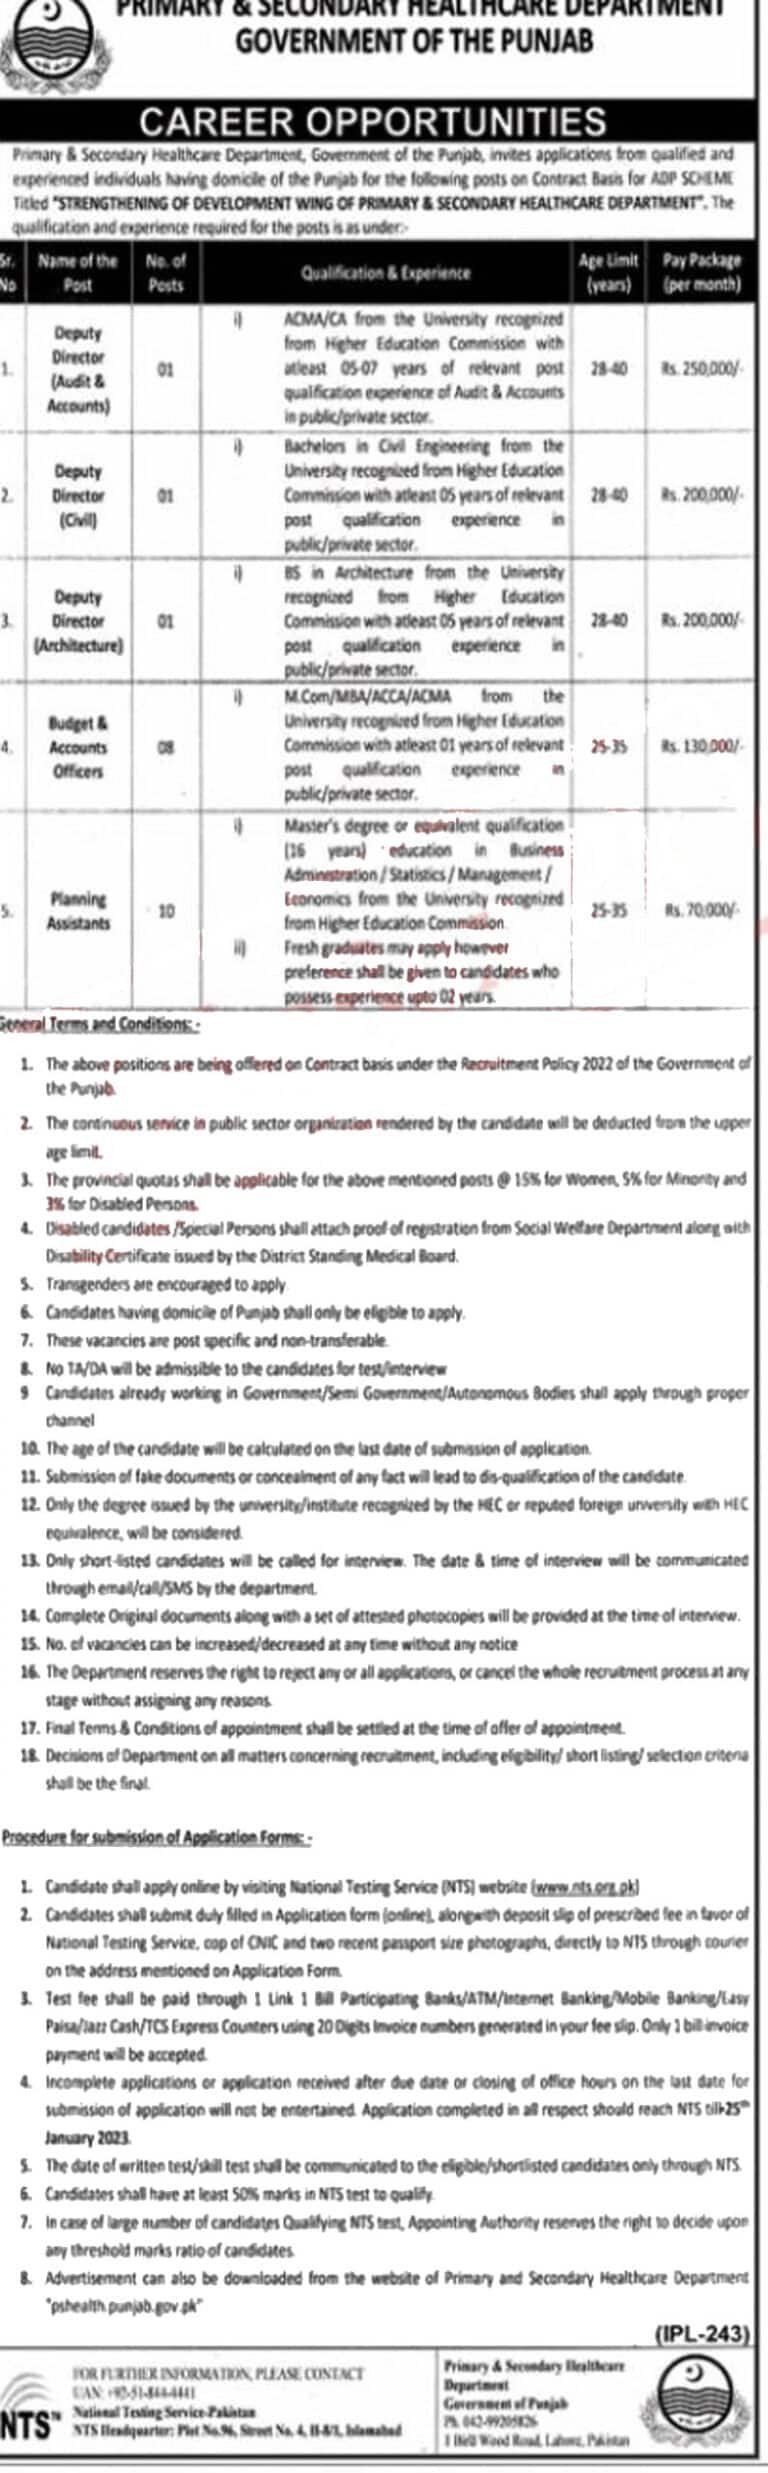 Primary and Secondary Healthcare Department Punjab Jobs 2023